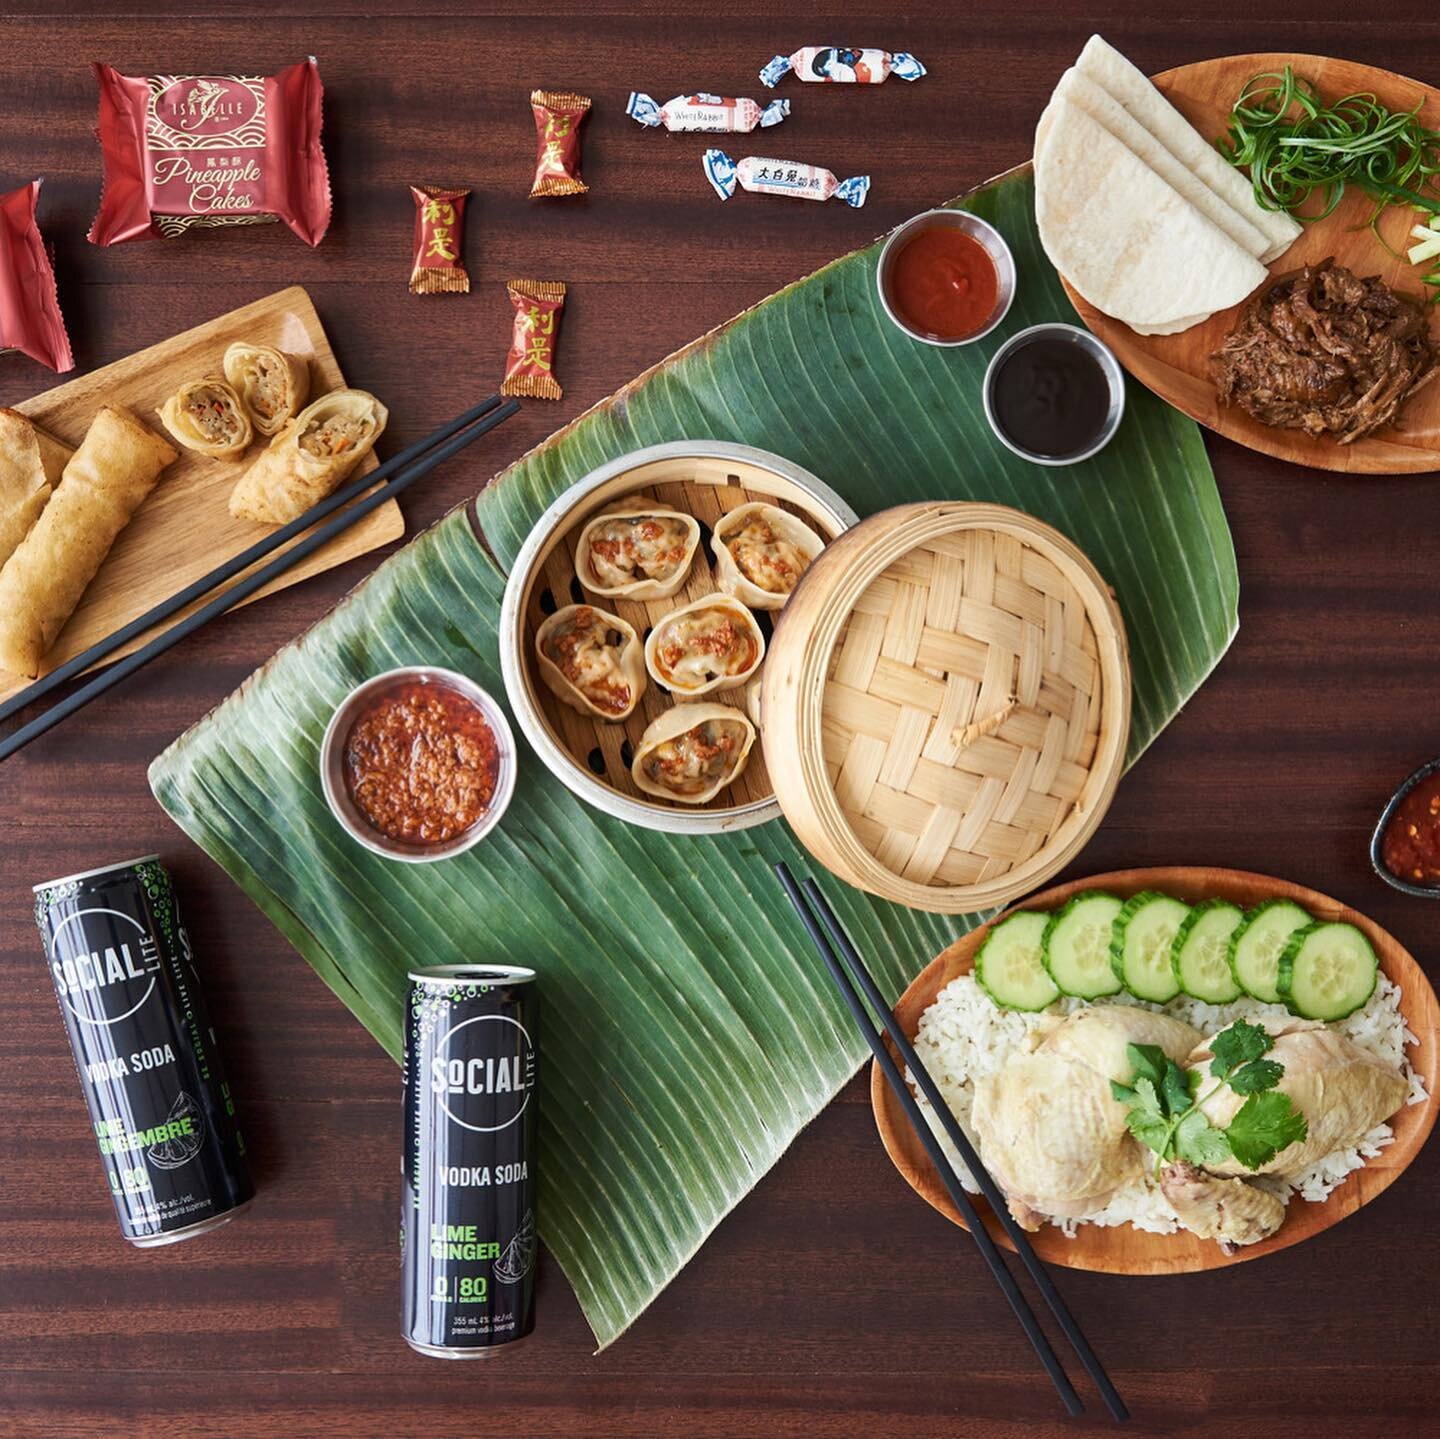 Happy lunar new year - let&rsquo;s celebrate the year of the Ox with our lunar new year bundles. 
⁣
⁣Our Chinese new year feast includes
- Our house made spring rolls 
- Mapo tofu dumplings 
- Confit Peking duck wraps 
- Hainanese Chicken with chicke